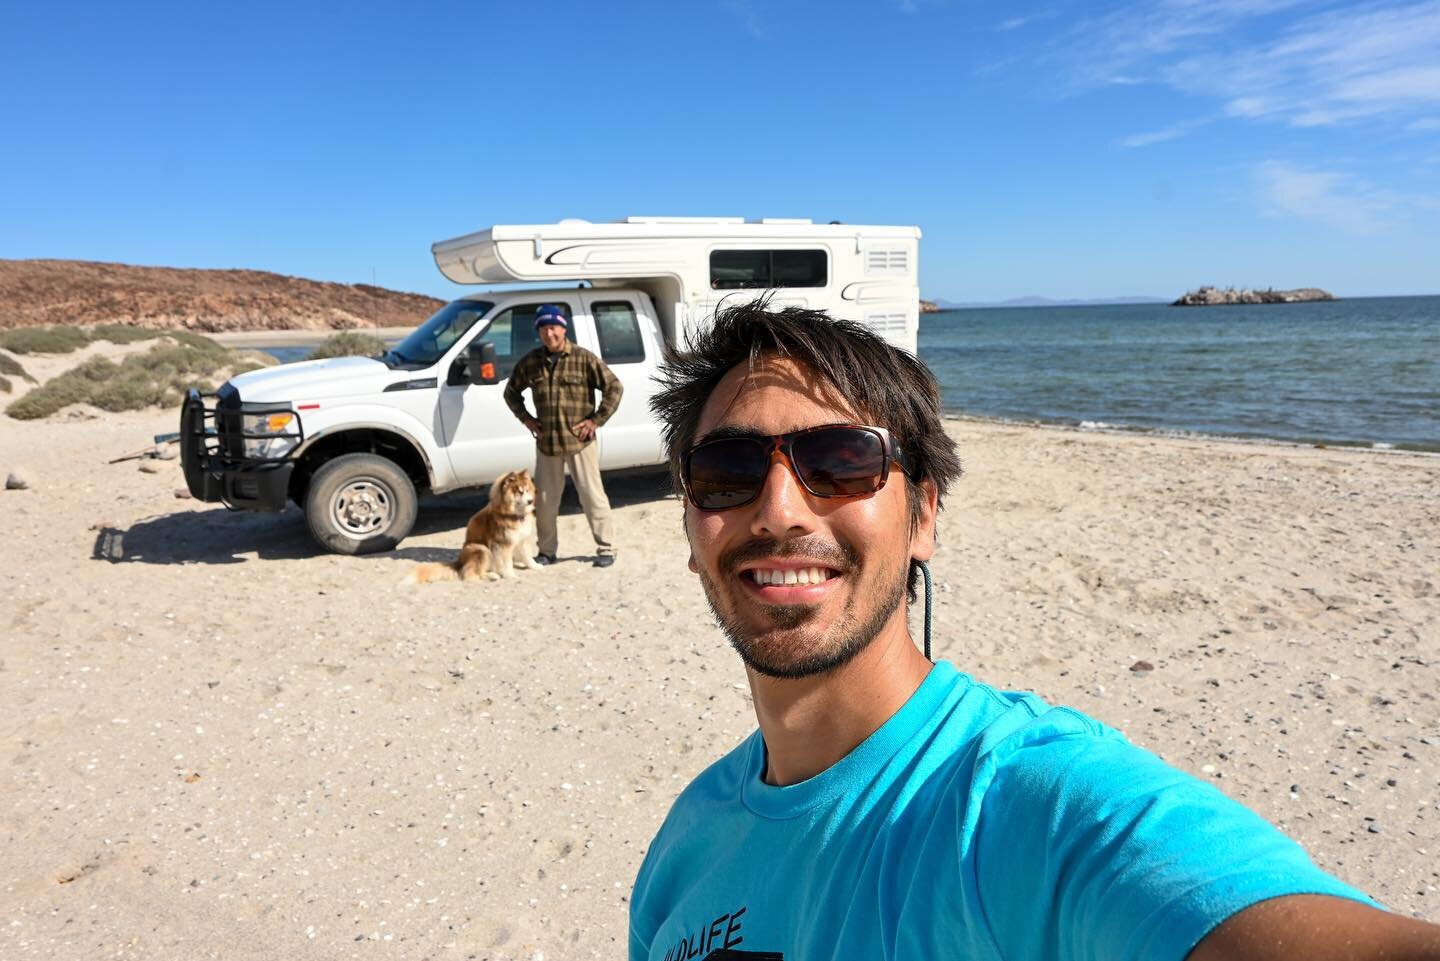 Hi amigos! Thought I&rsquo;d officially introduce myself and put a face to Agave Expeditions, I&rsquo;ve gotten some emails asking who the hell runs this operation so here it is 🤠 My name is Gabe and I&rsquo;m a 30 year old San Diego native who live